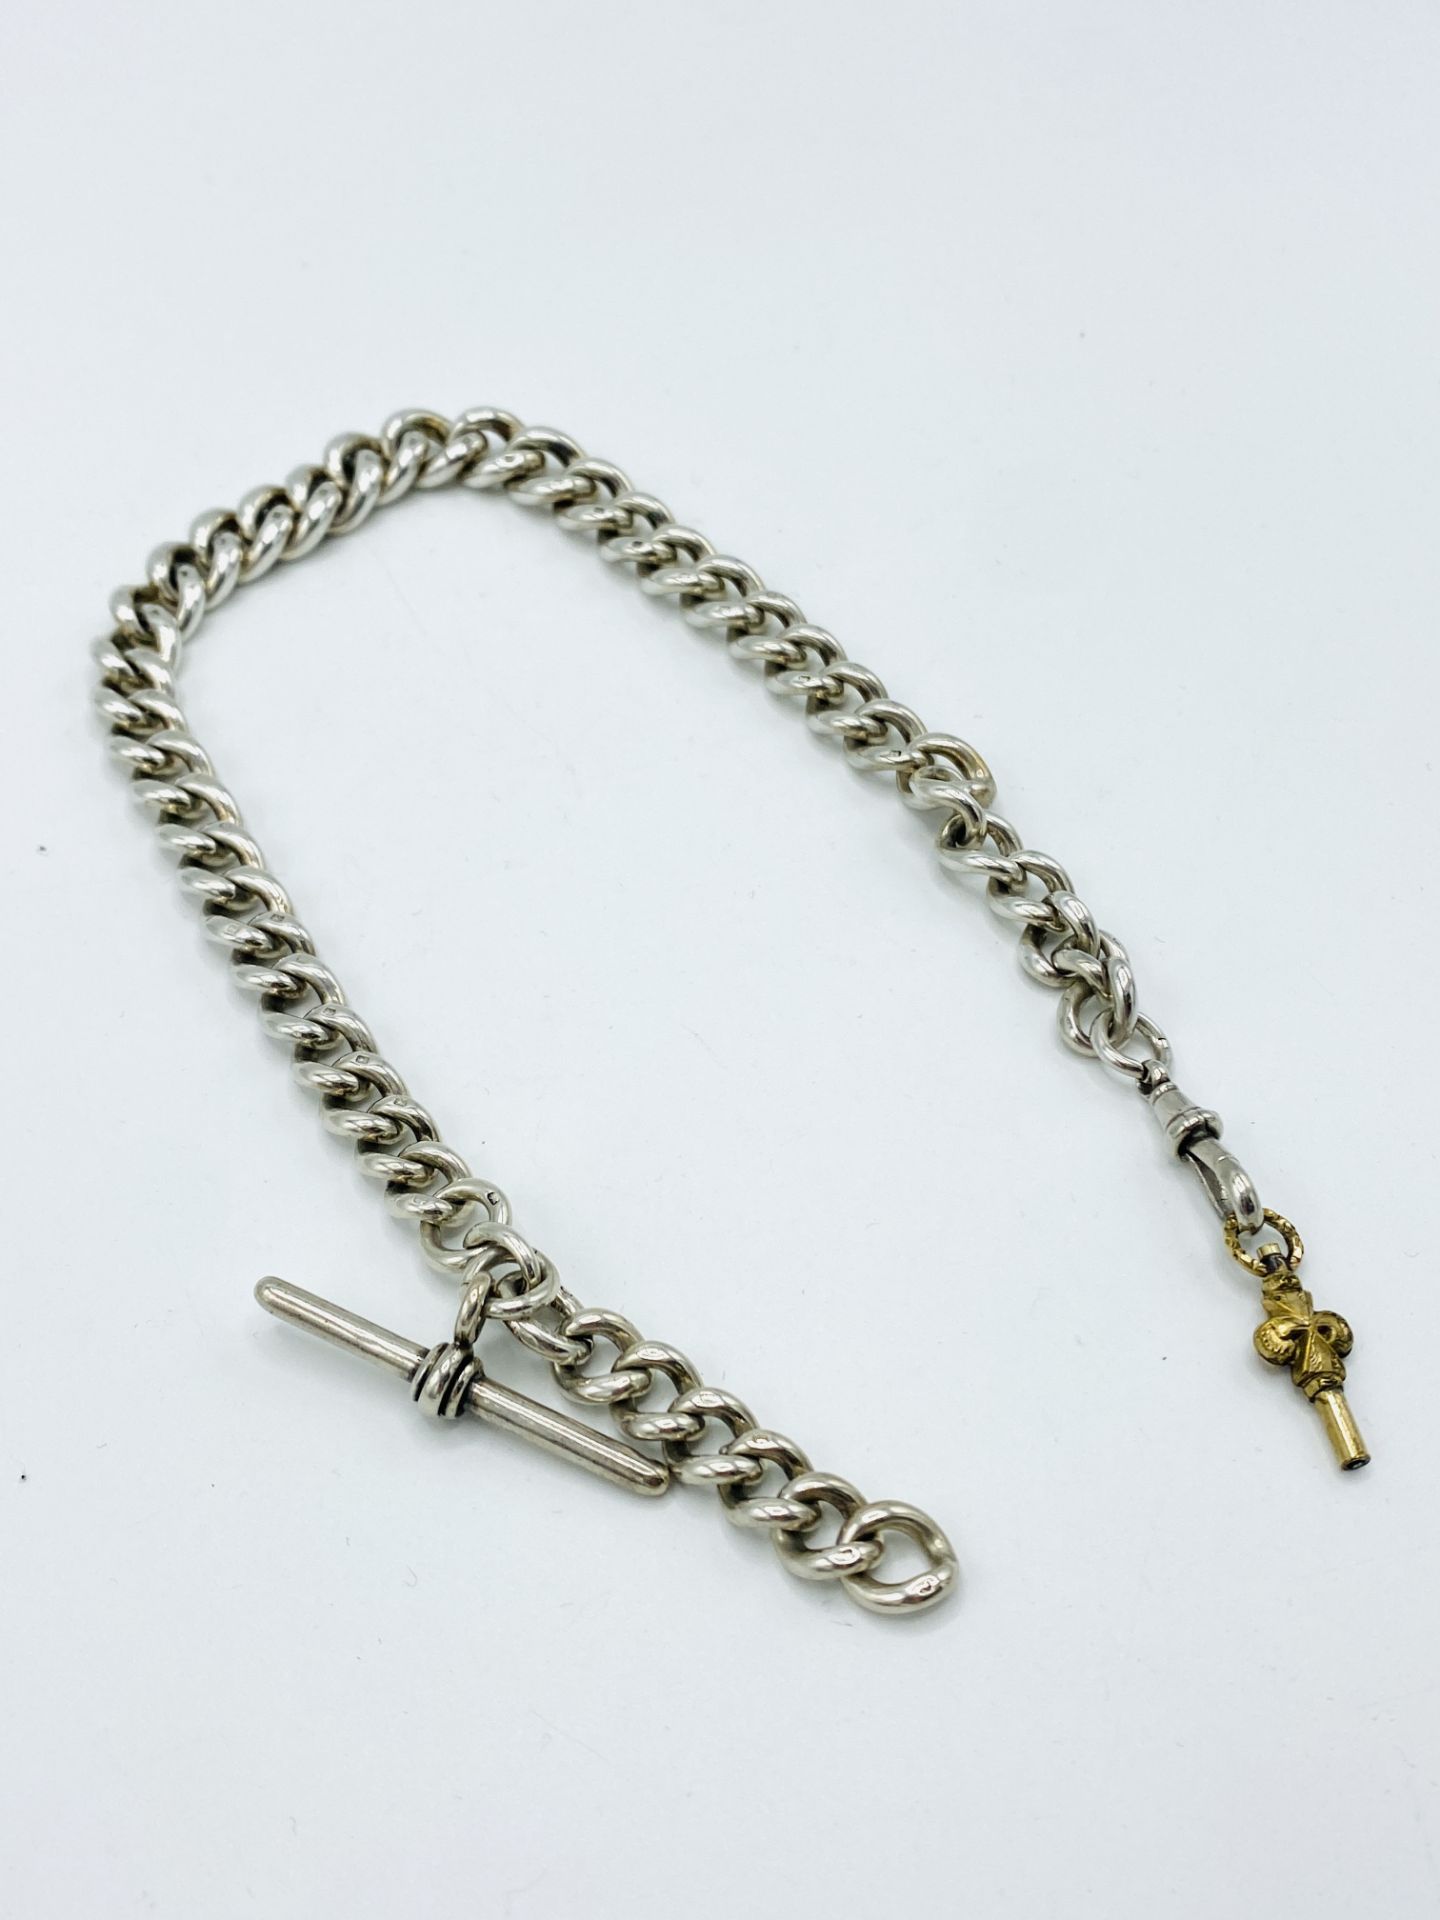 Silver fob chain - Image 4 of 6